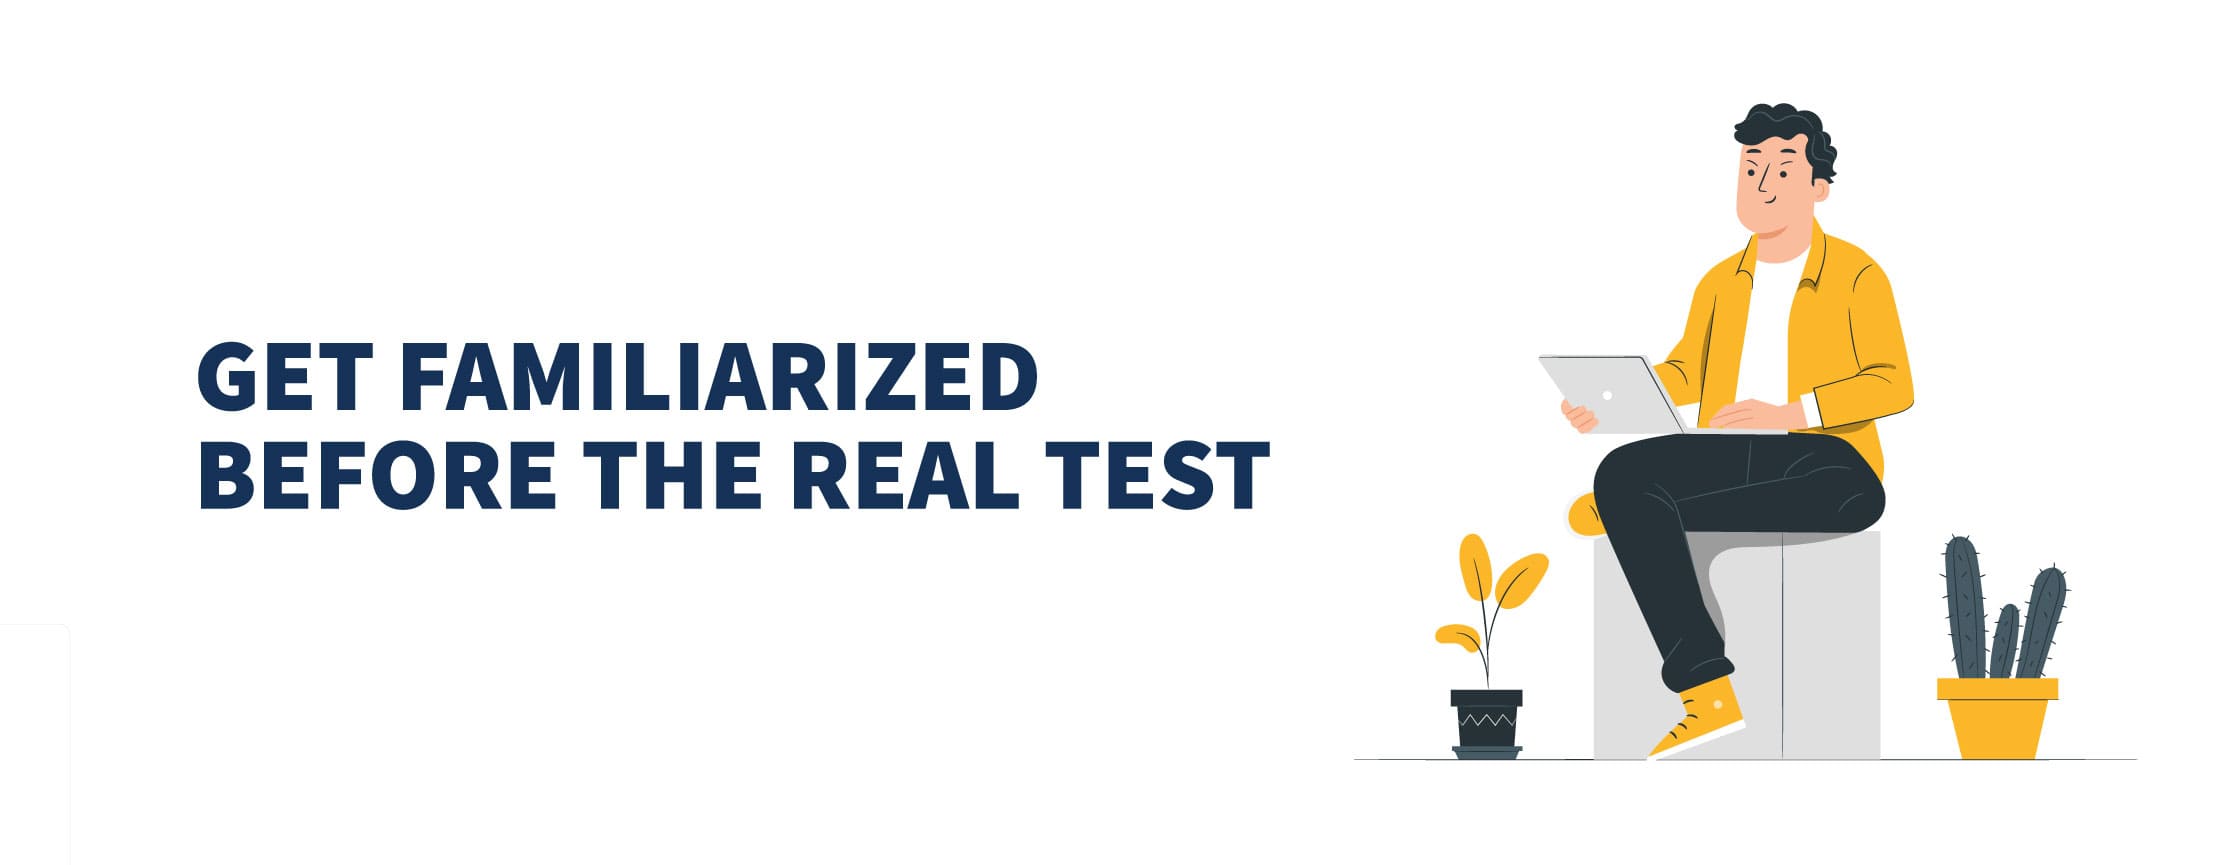 Get Familiarized Before the Real Test